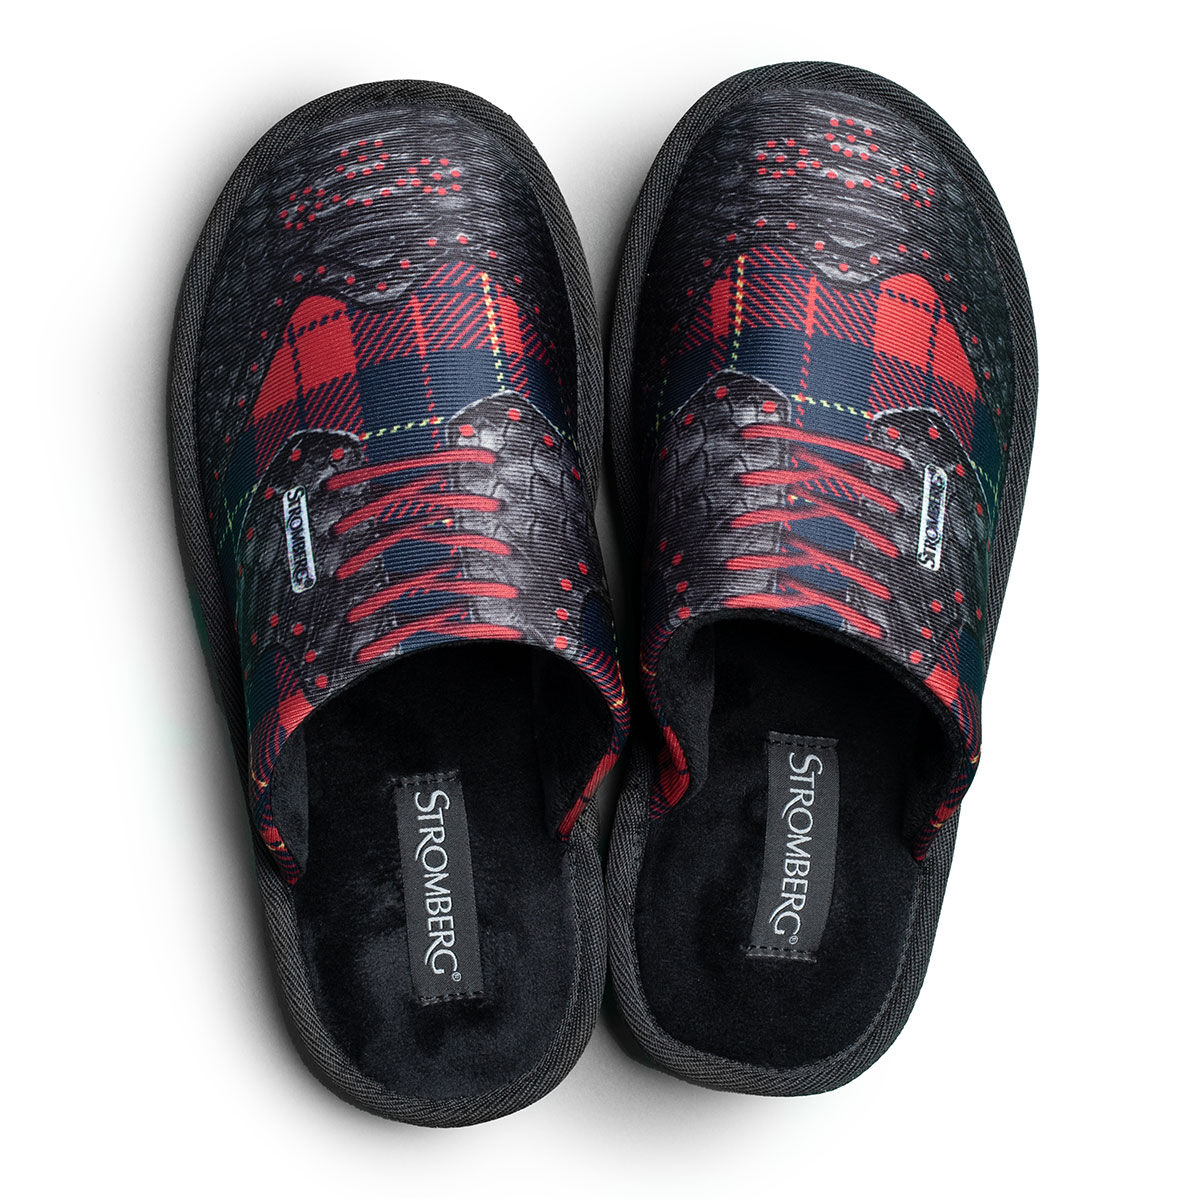 Stromberg Black, Grey and Red Comfortable Tartan Mule Golf Slippers, Size: 10 | American Golf